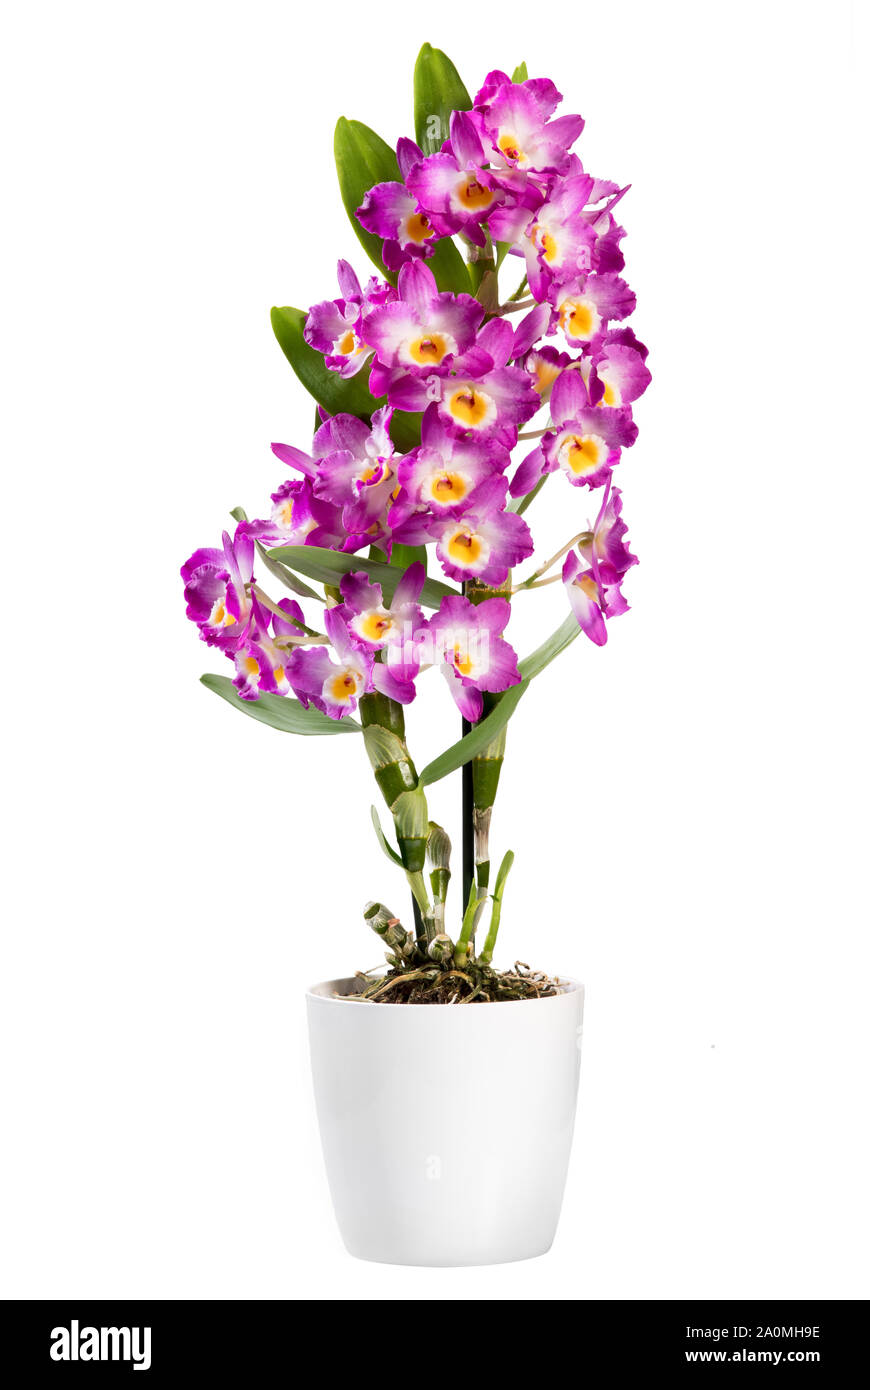 Potted Dendrobium plant isolated on white, an epiphytic orchid with sprays of colorful bright pink flowers and popular houseplant Stock Photo